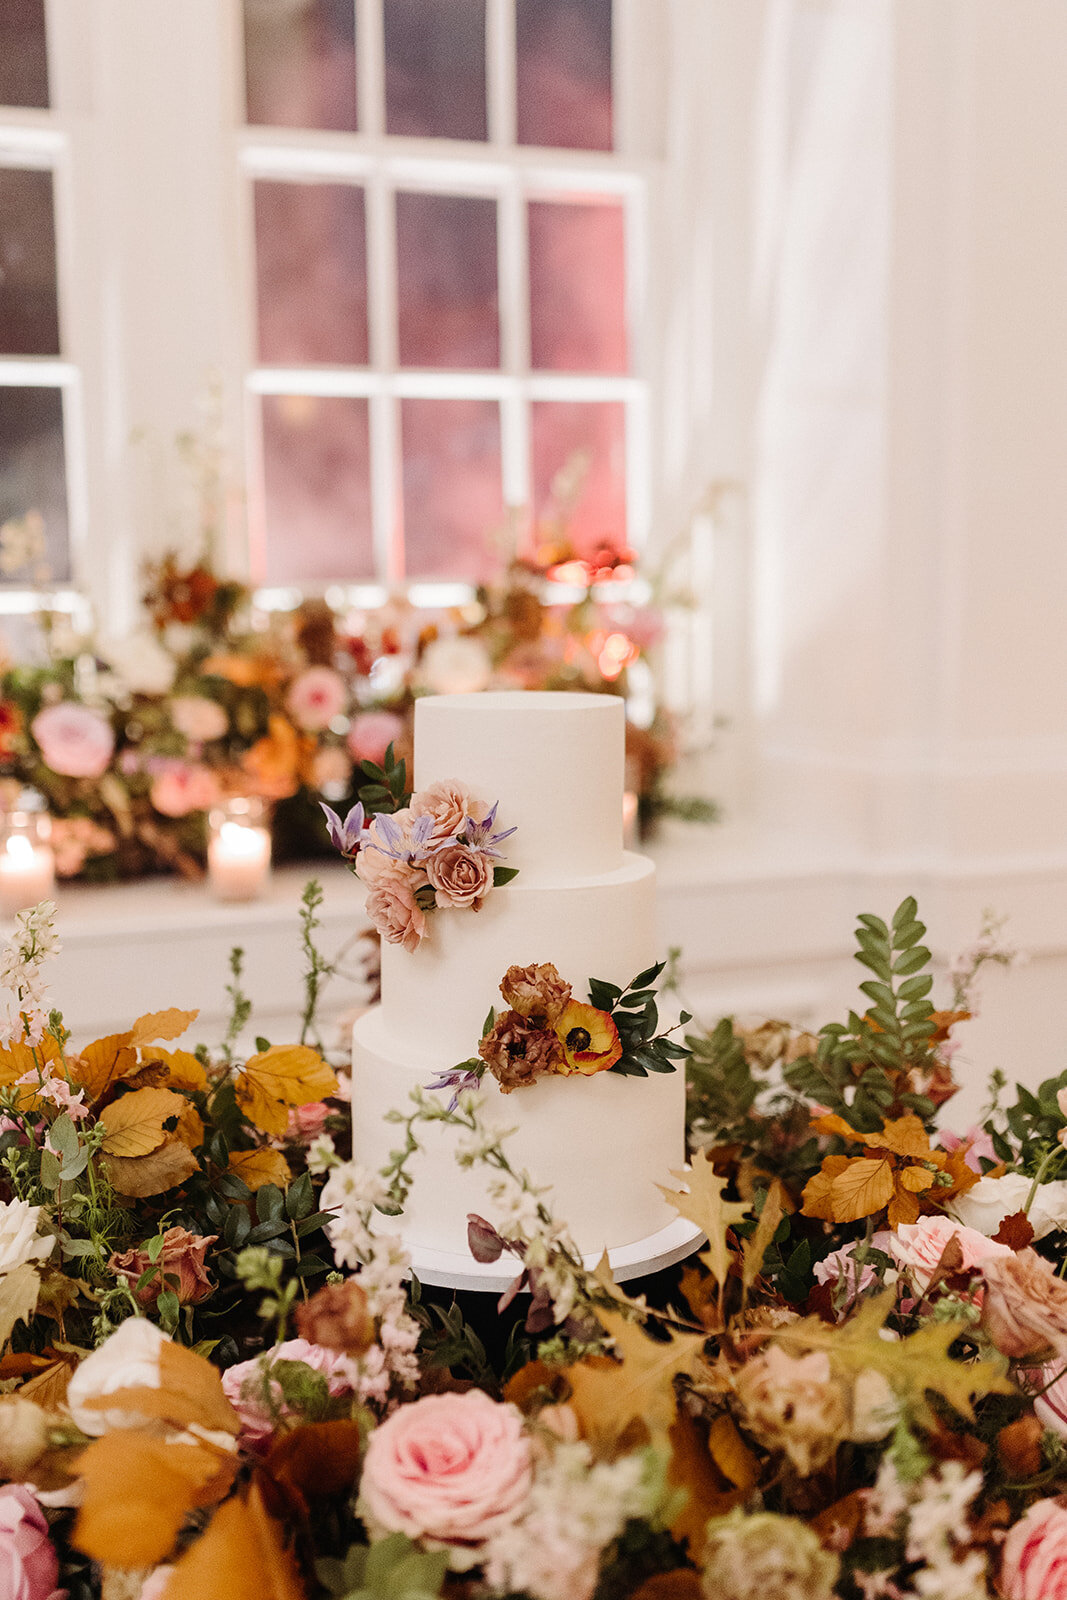 Elegant floral meadows surround a cake at this autumnal wedding in hues in dusty rose, copper, burnt orange, burgundy, and lavender composed of petal heavy roses, ranunculus, dried hydrangea, copper beech, delphinium, and fall foliage. Design by Rosemary and Finch in Nashville, TN.